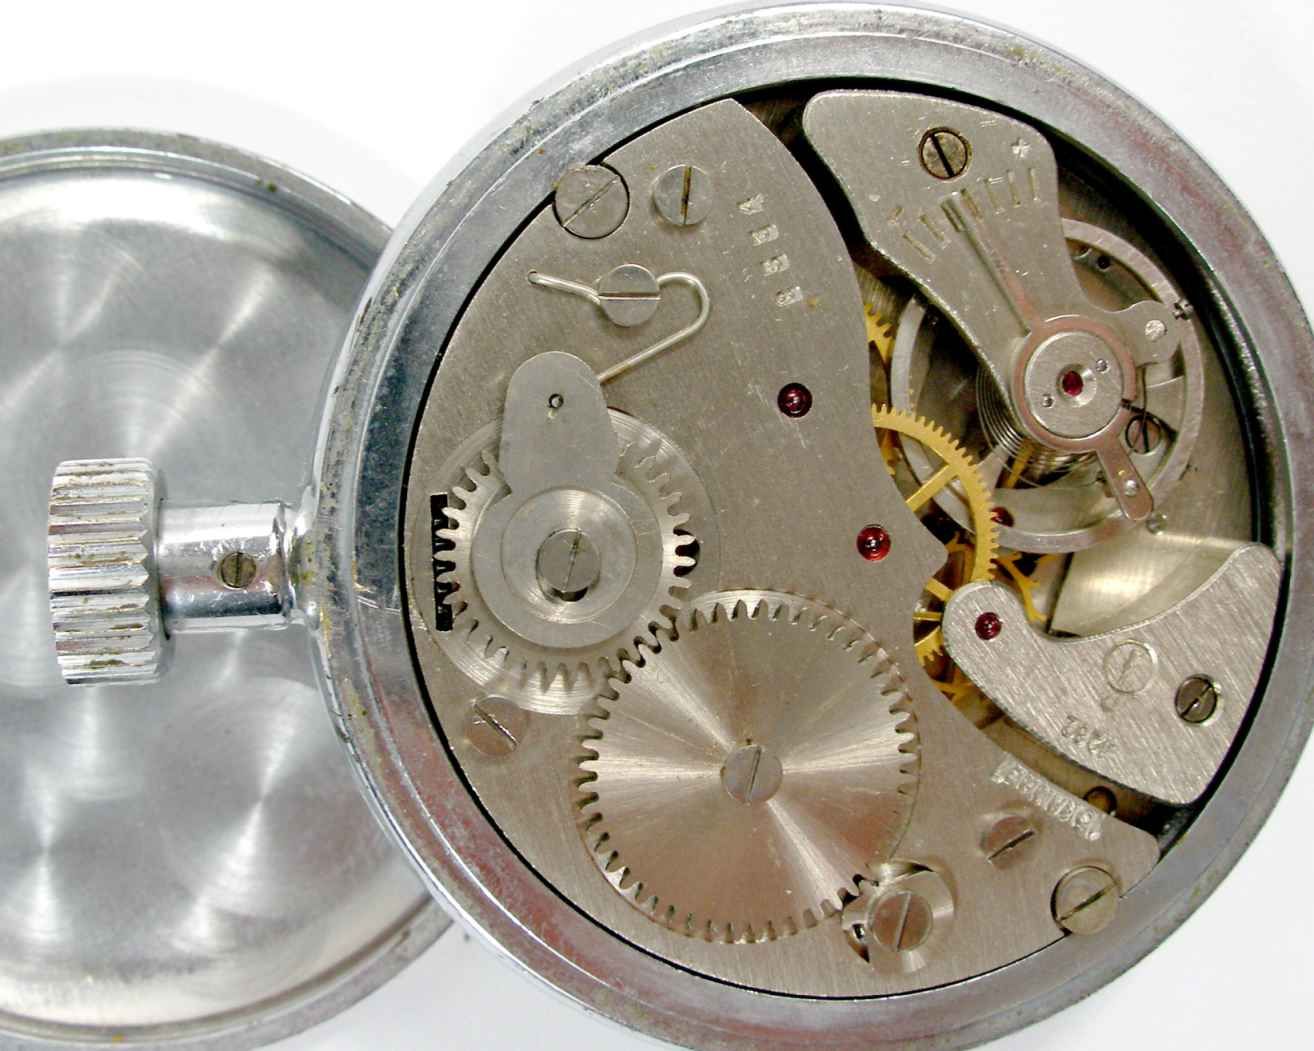 AGAT Vintage Russian USSR Mechanical Stop Watch 15 Jewels A49